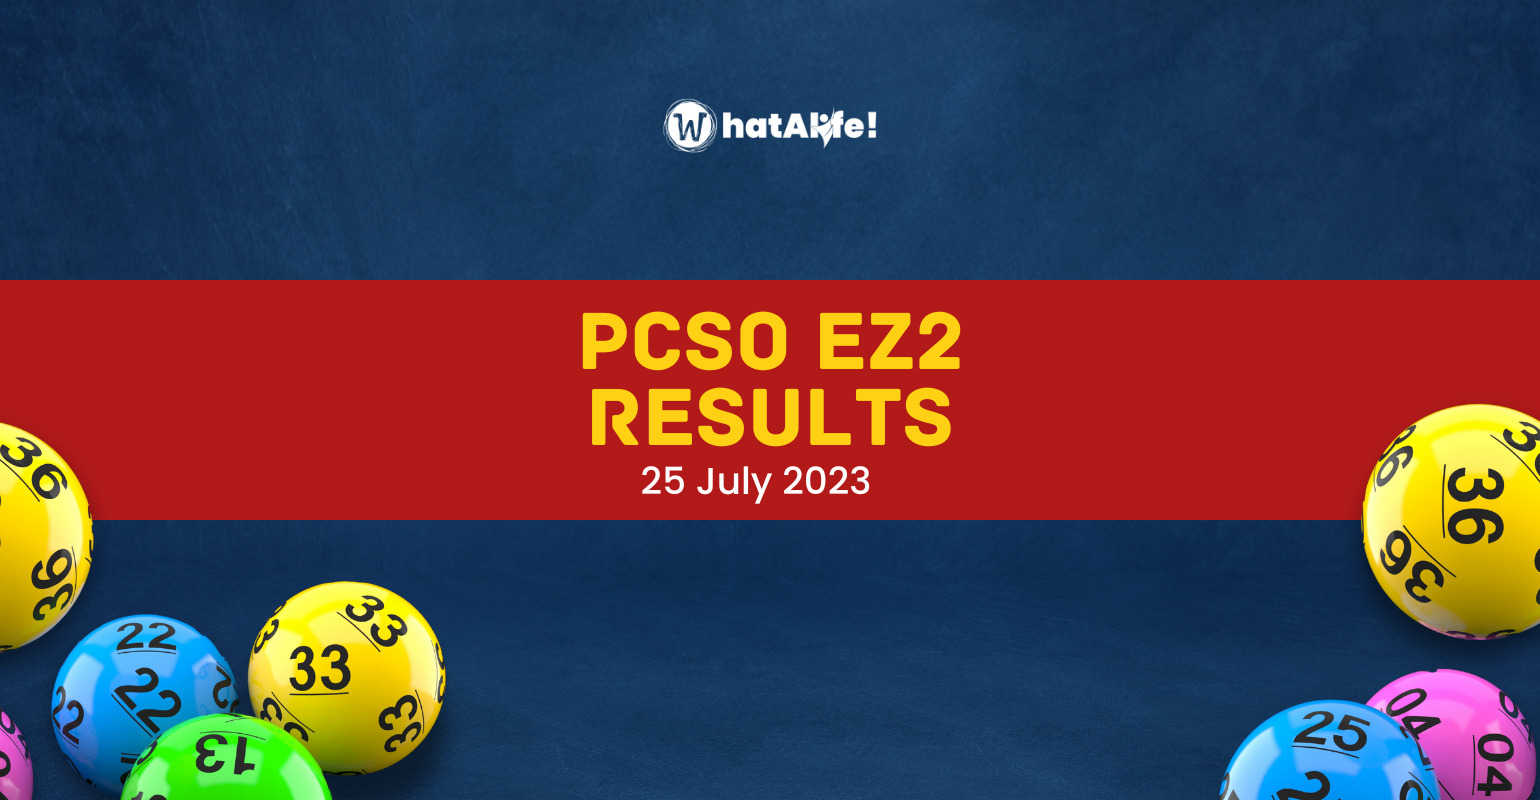 EZ2 2D RESULTS July 25, 2023 (Tuesday)